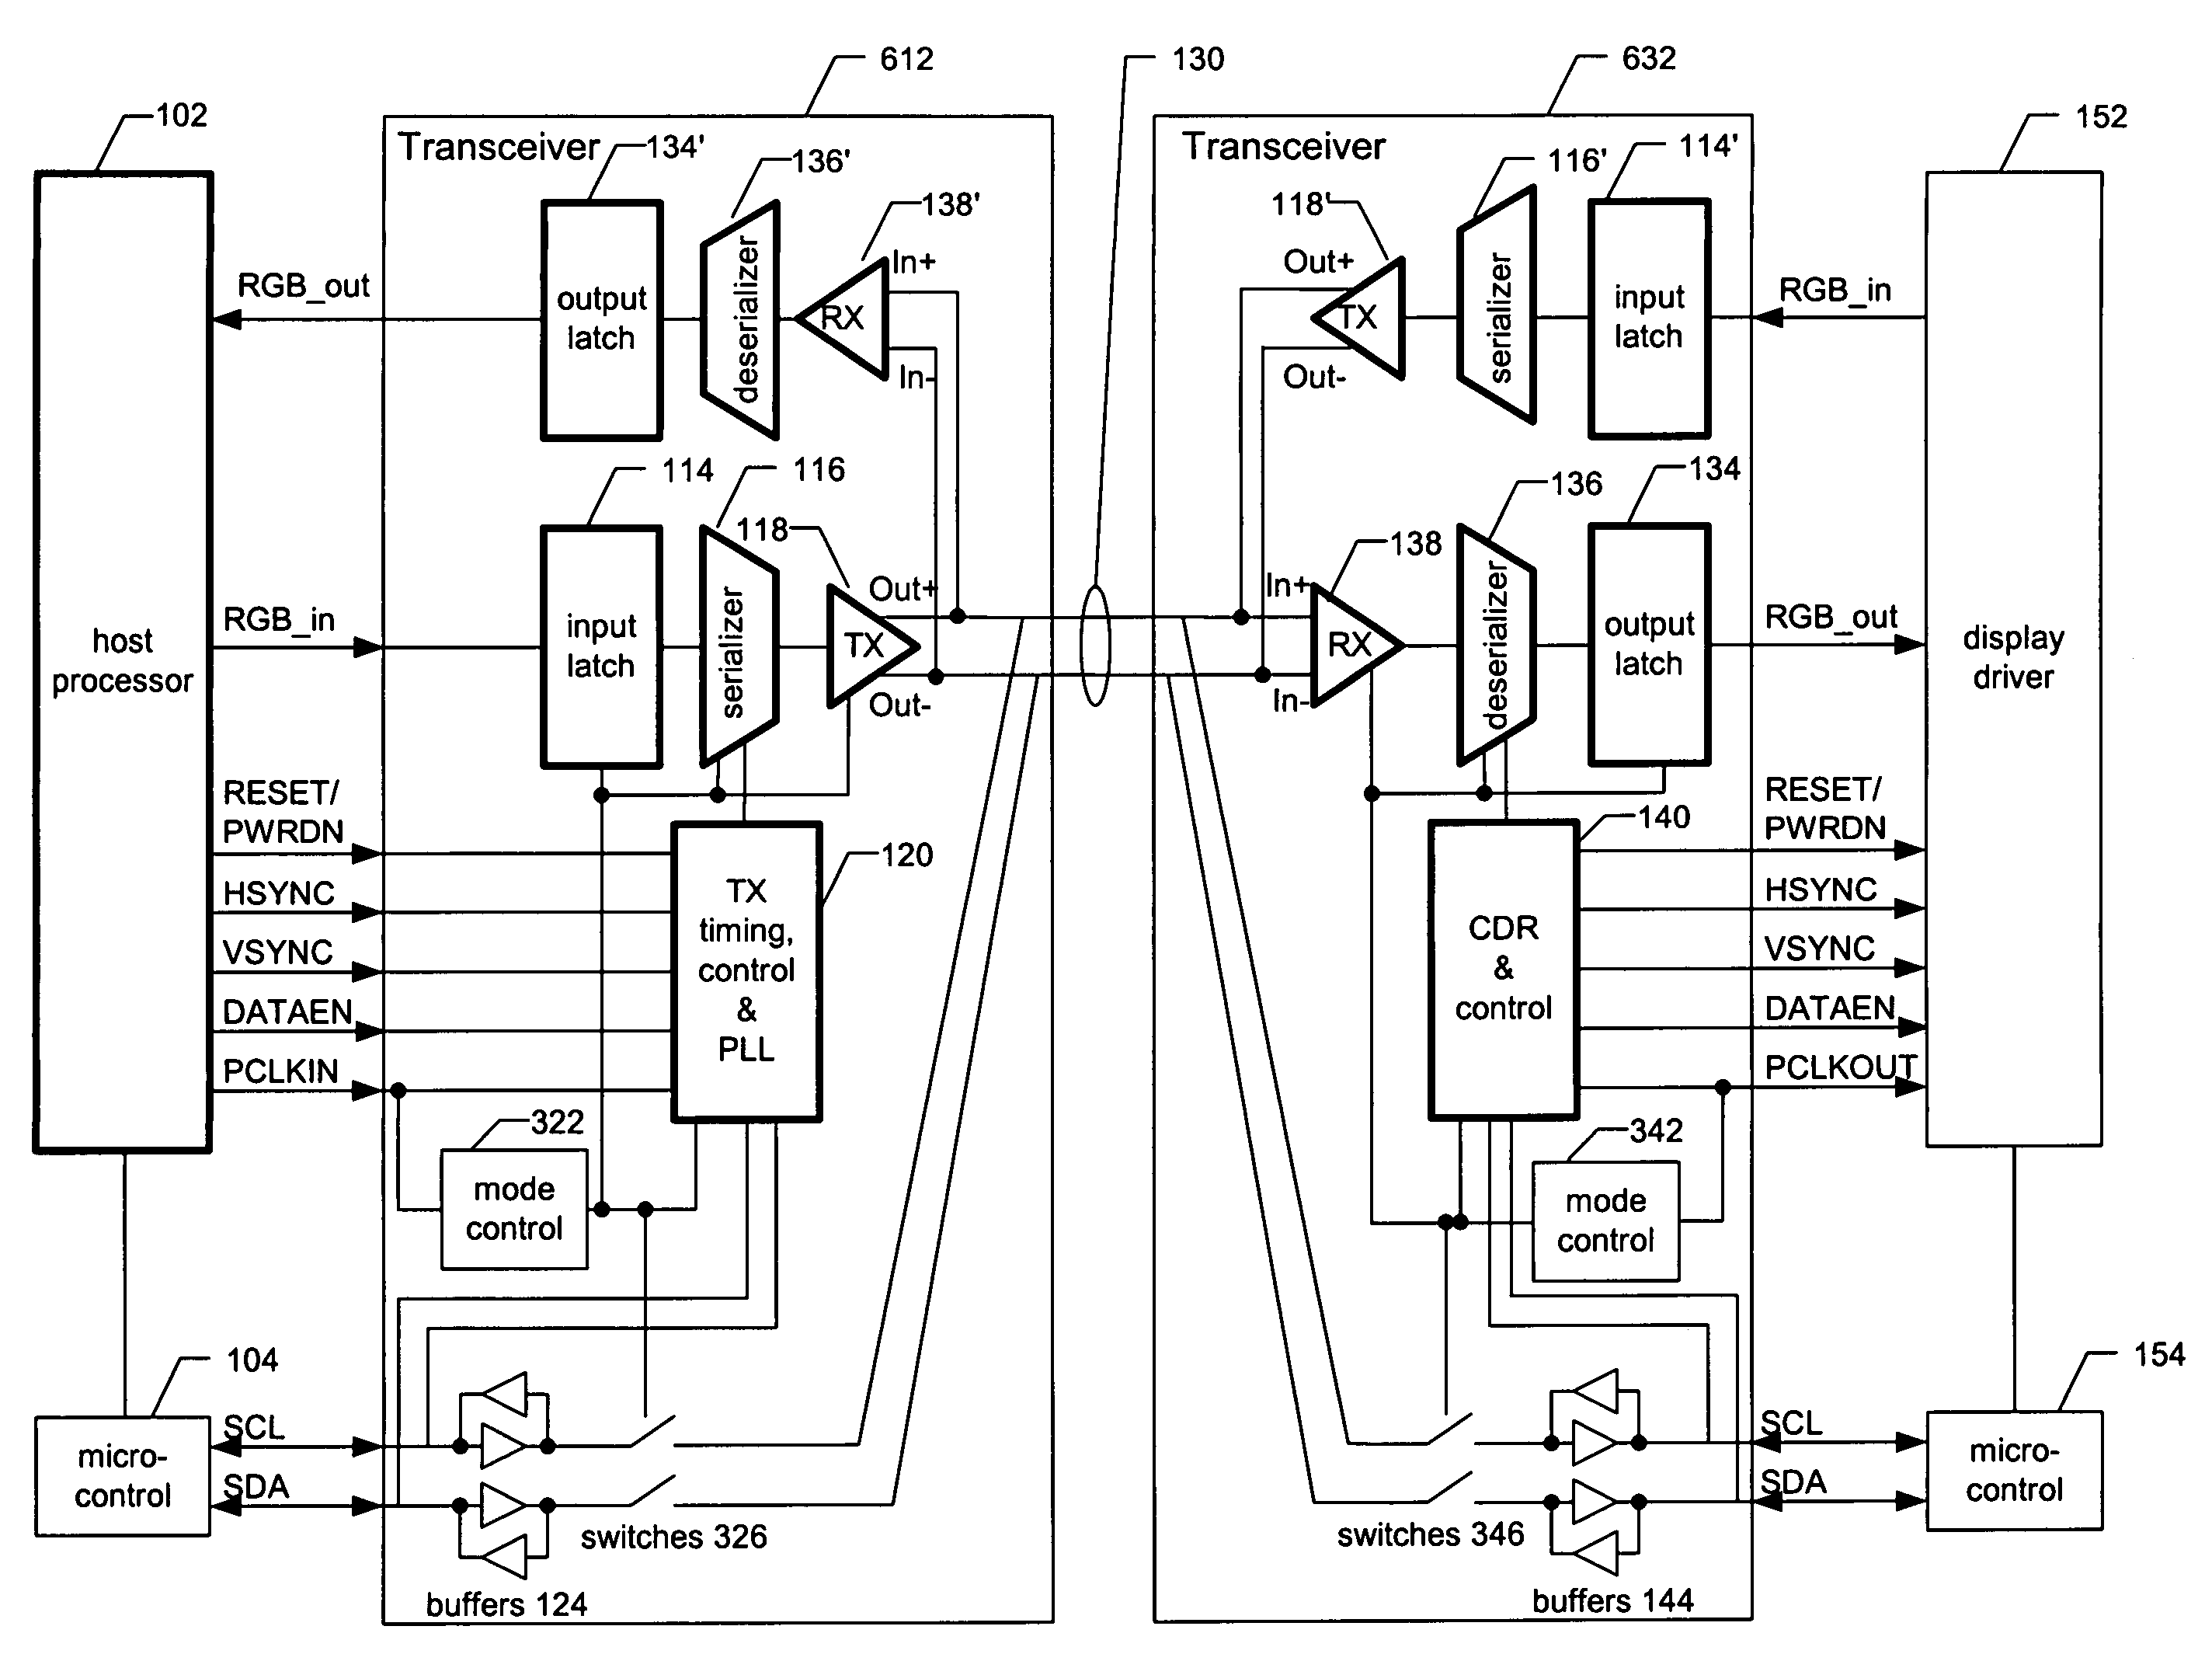 Use of differential pair as single-ended data paths to transport low speed data